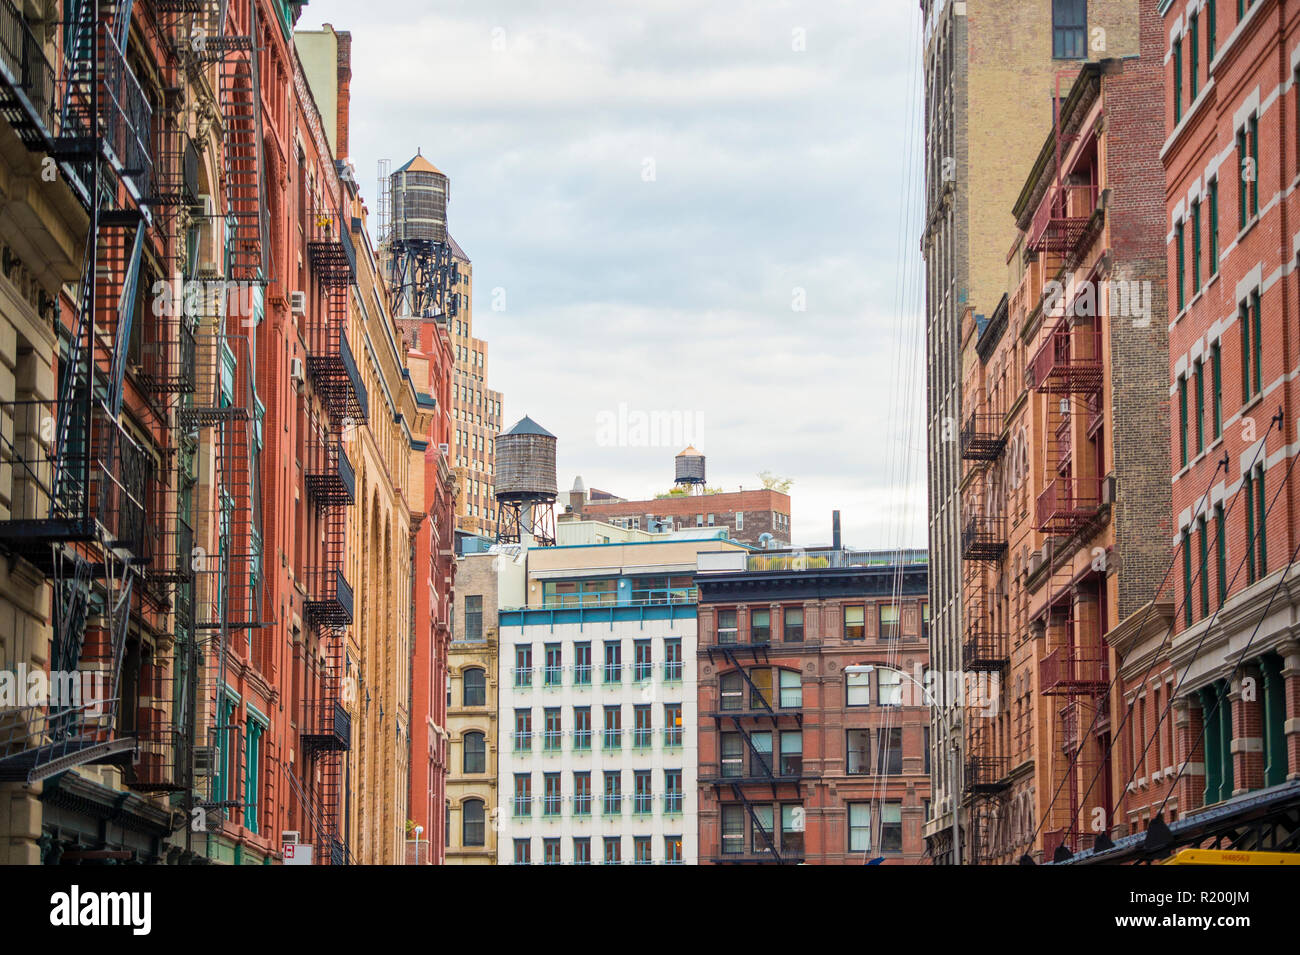 Close-up view of New York City style apartment buildings with emergency stairs along Mott Street in the Chinatown neighborhood of Manhattan NYC. Stock Photo